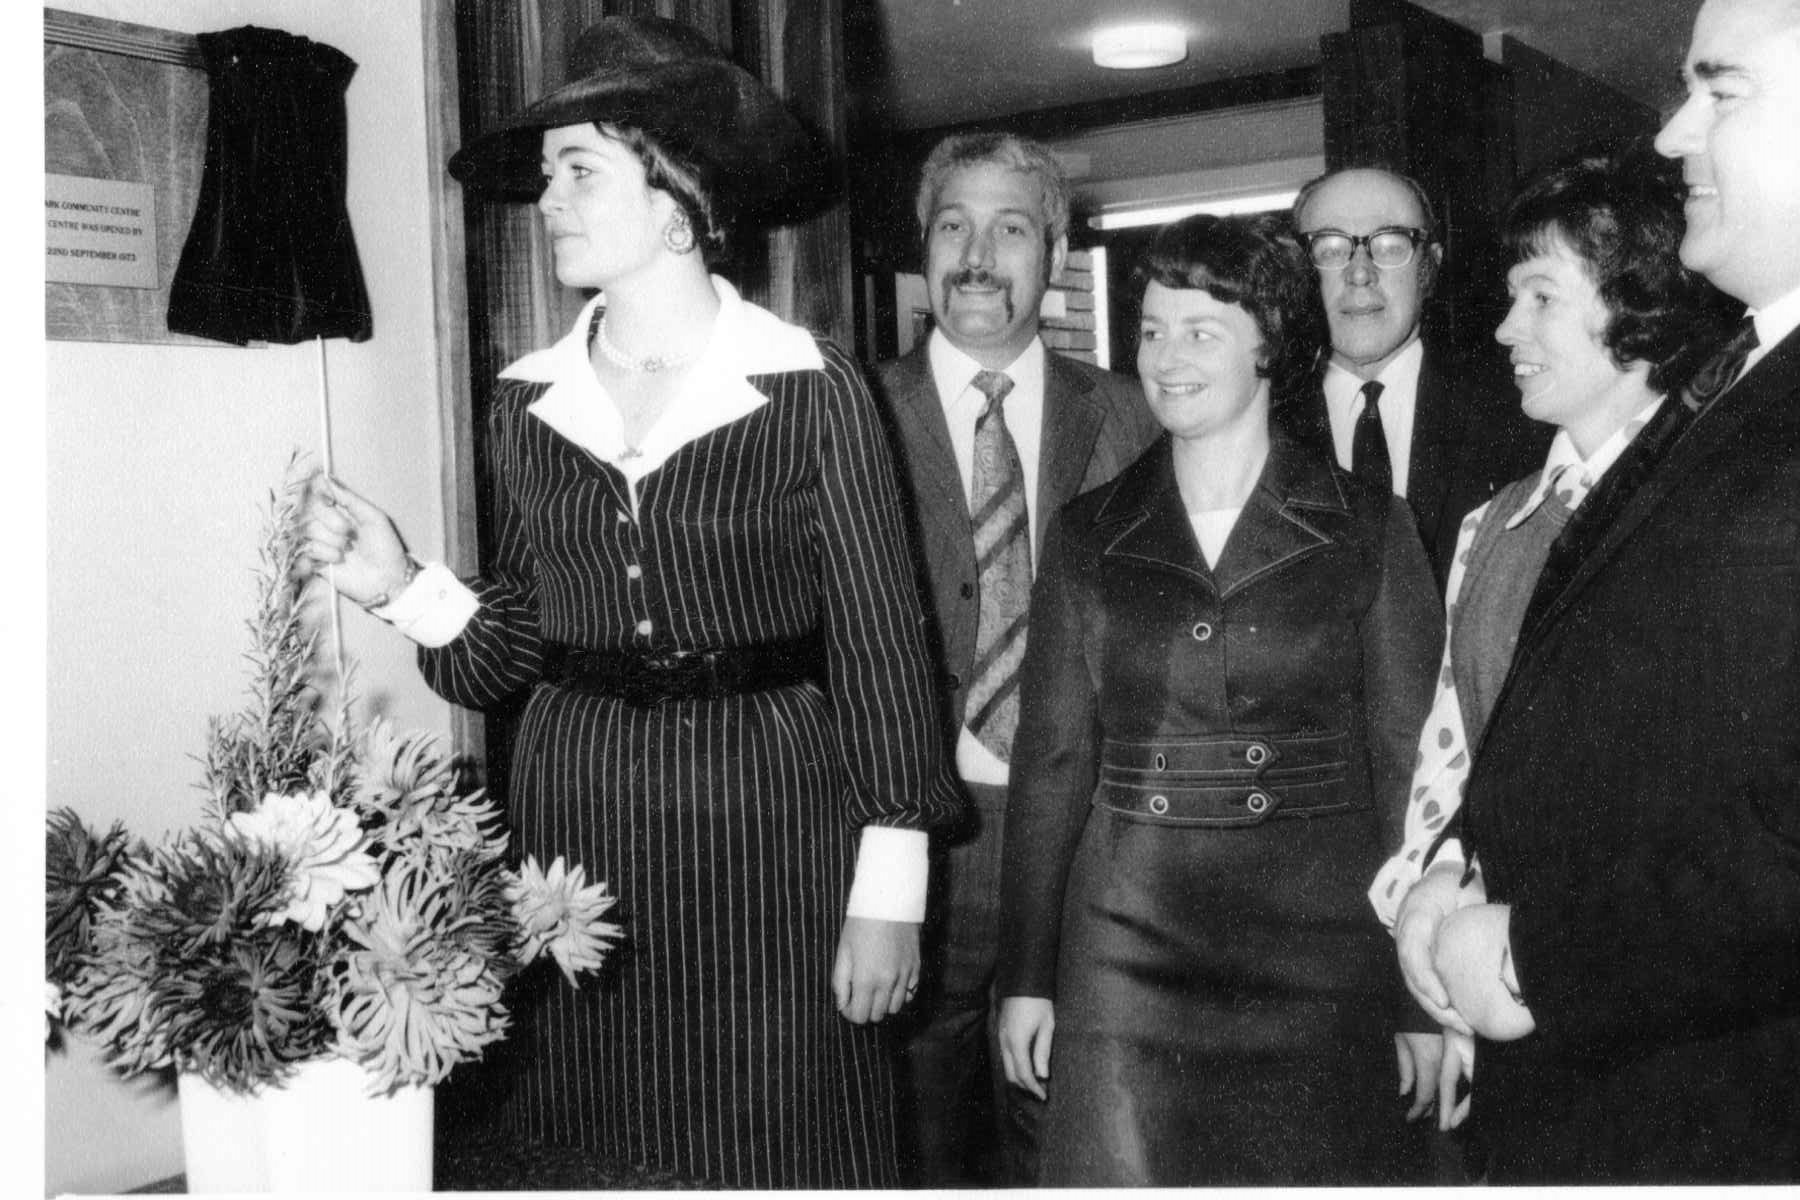 Westminster Park Community Centre was officially opened on September 22, 1973 by Lady Jane Grosvenor.